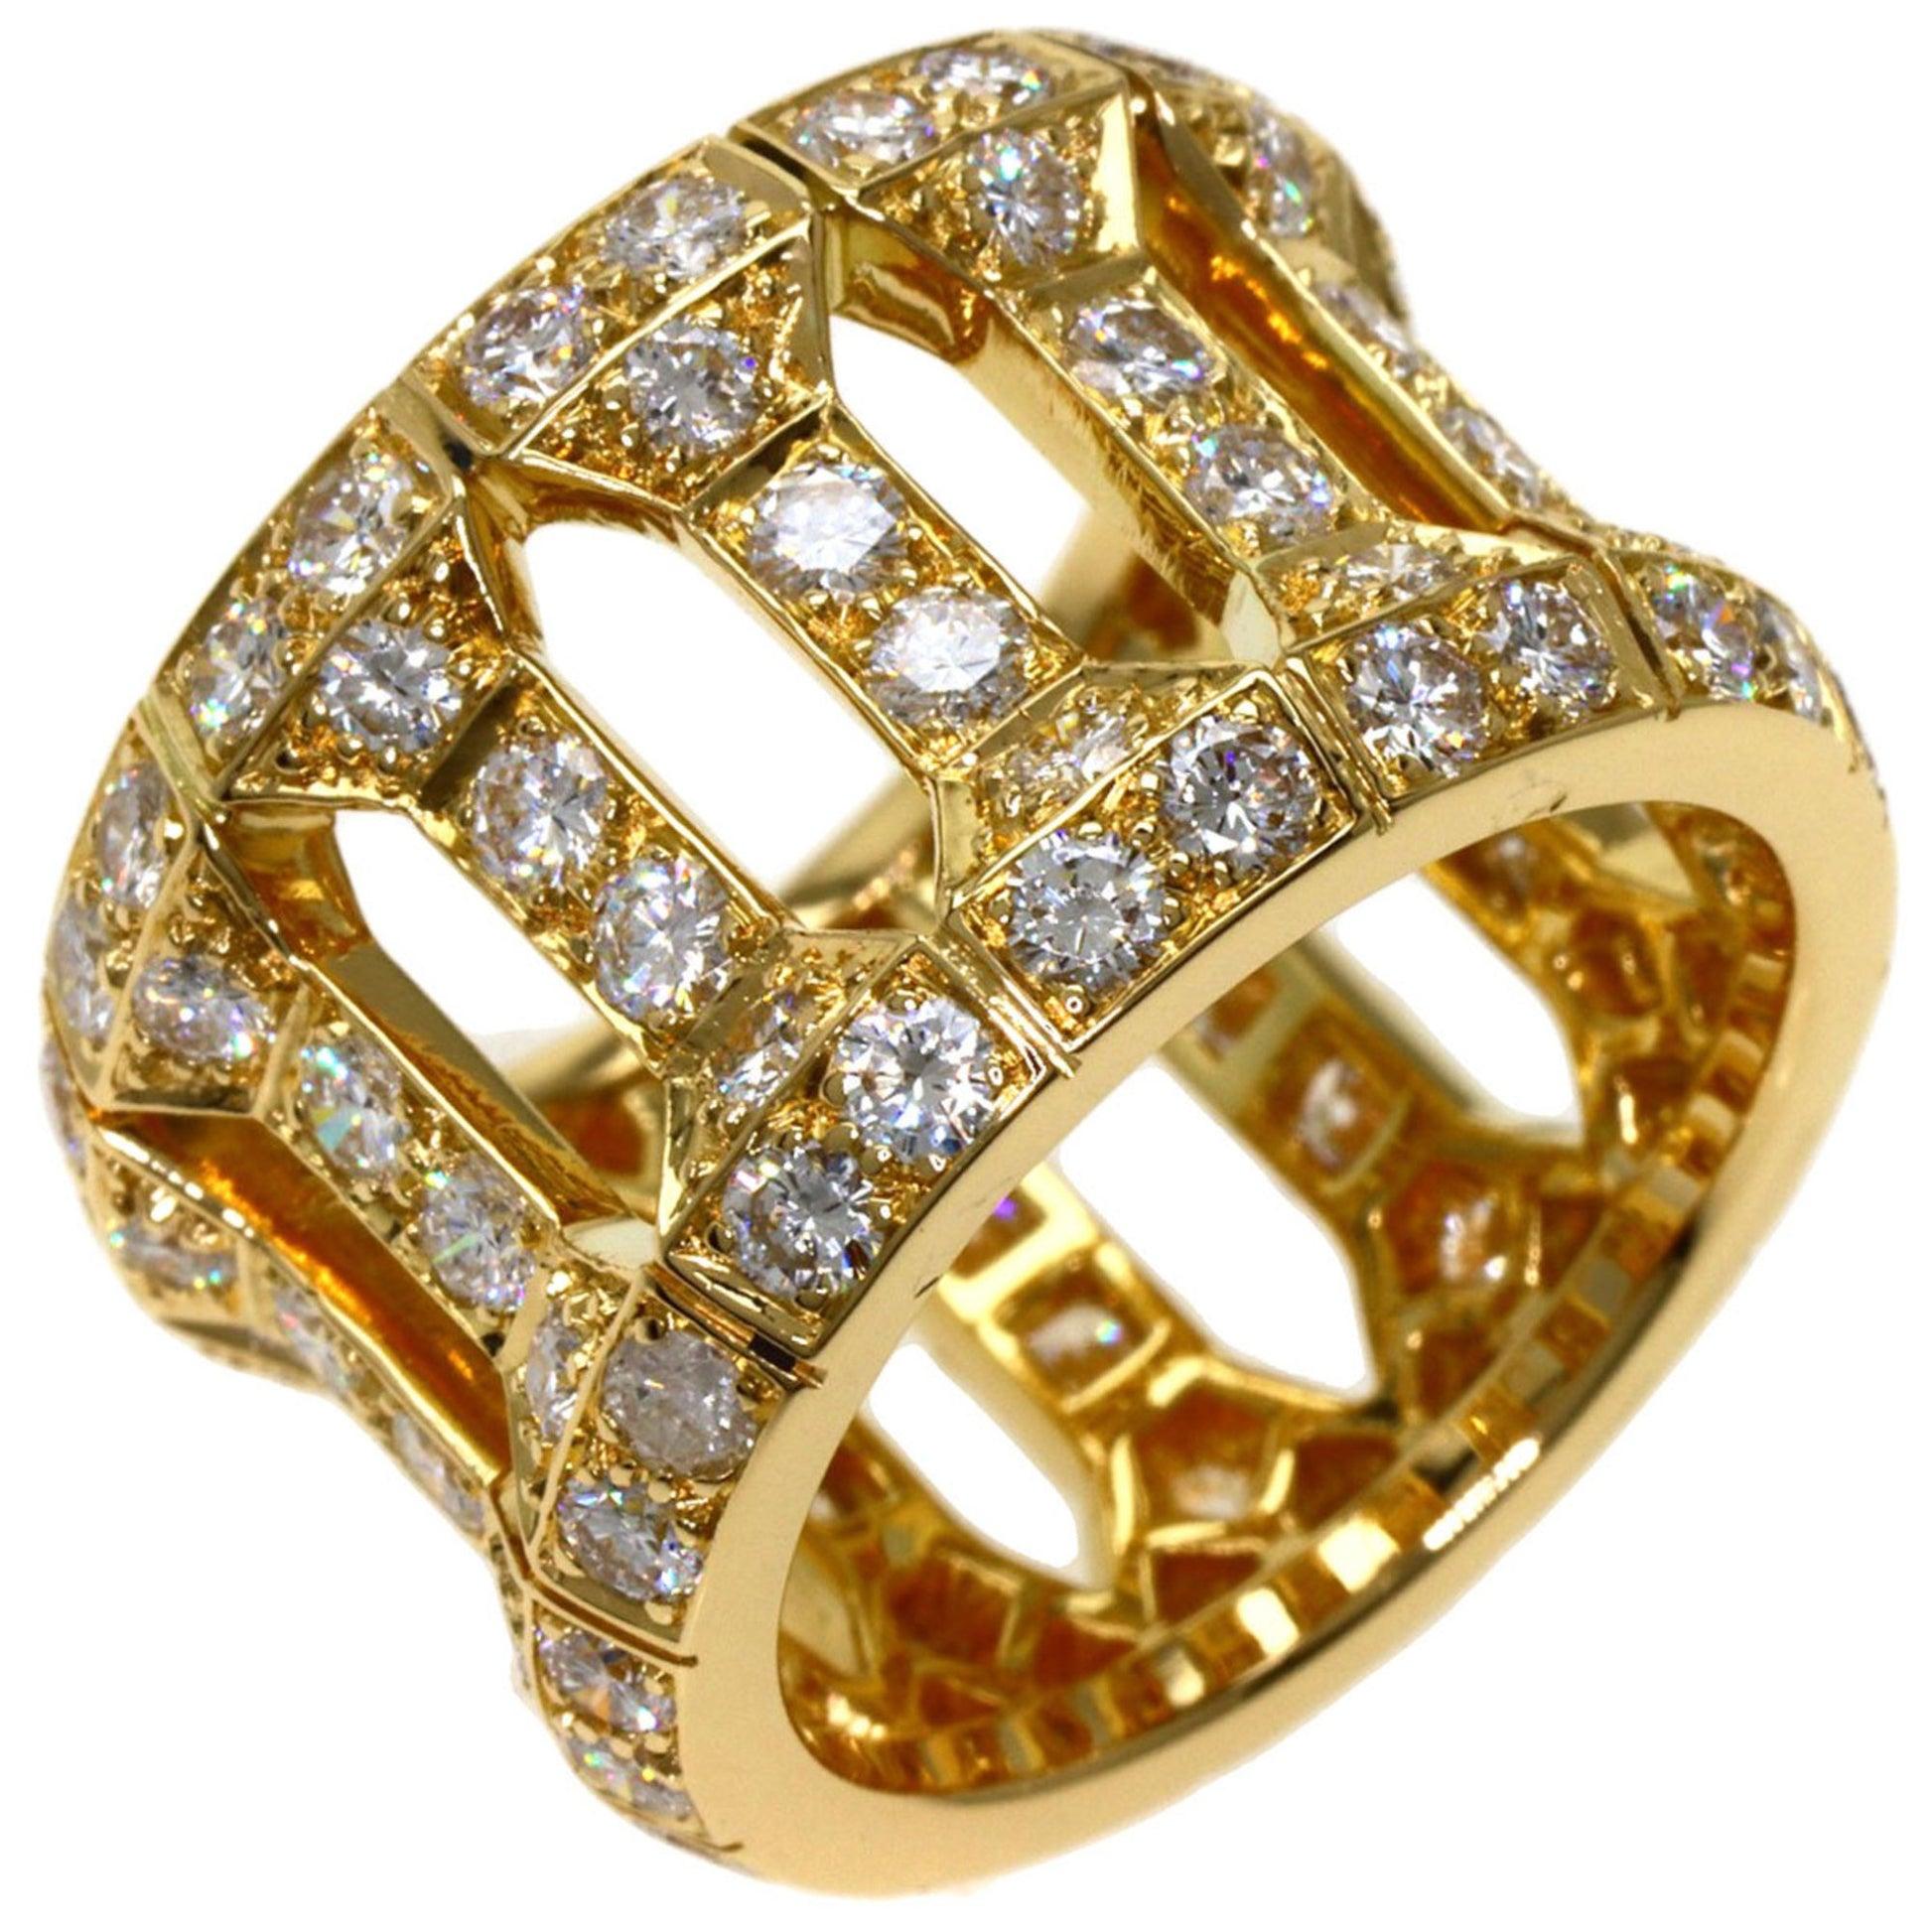 Cartier Antalia Diamond Ring in 18K Yellow Gold

Additional Information:
Brand: Cartier
Gender: Women
Gemstone: Diamond
Material: Yellow gold (18K)
Ring size (US): 6.5-7
Condition: Good
Condition details: The item has been used and has some minor